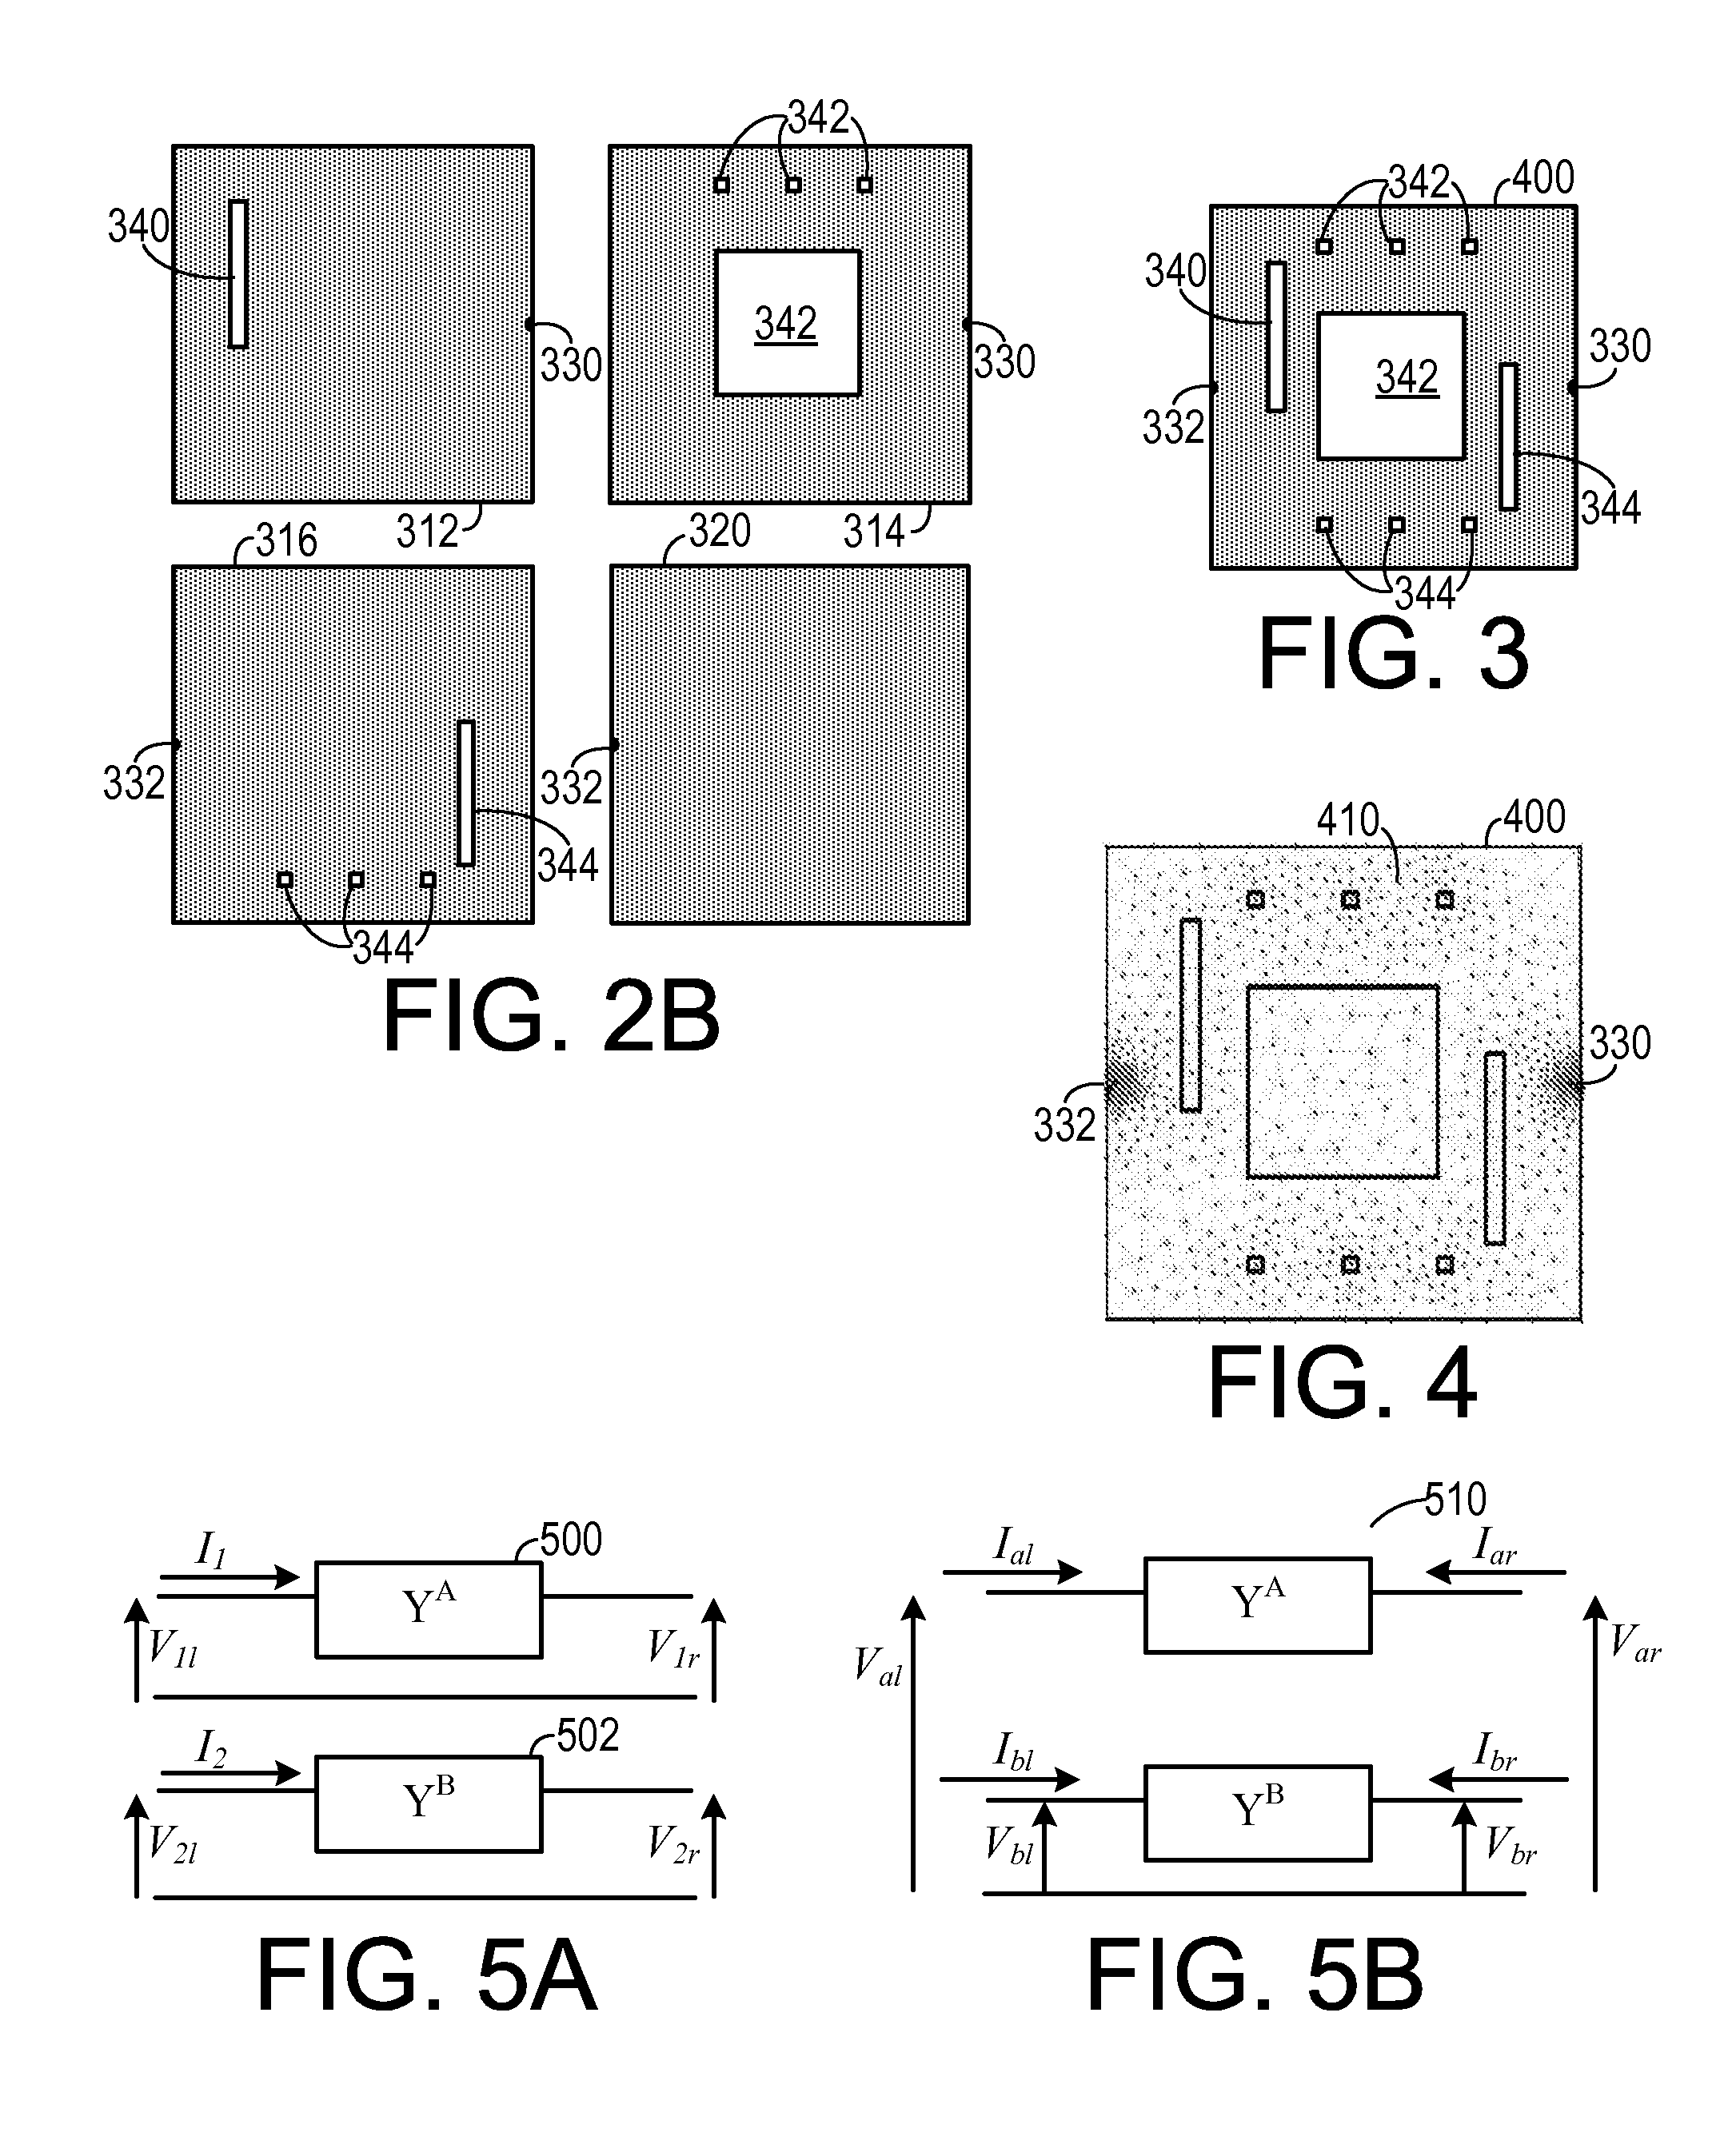 Multi-Layer Finite Element Method for Modeling of Package Power and Ground Planes